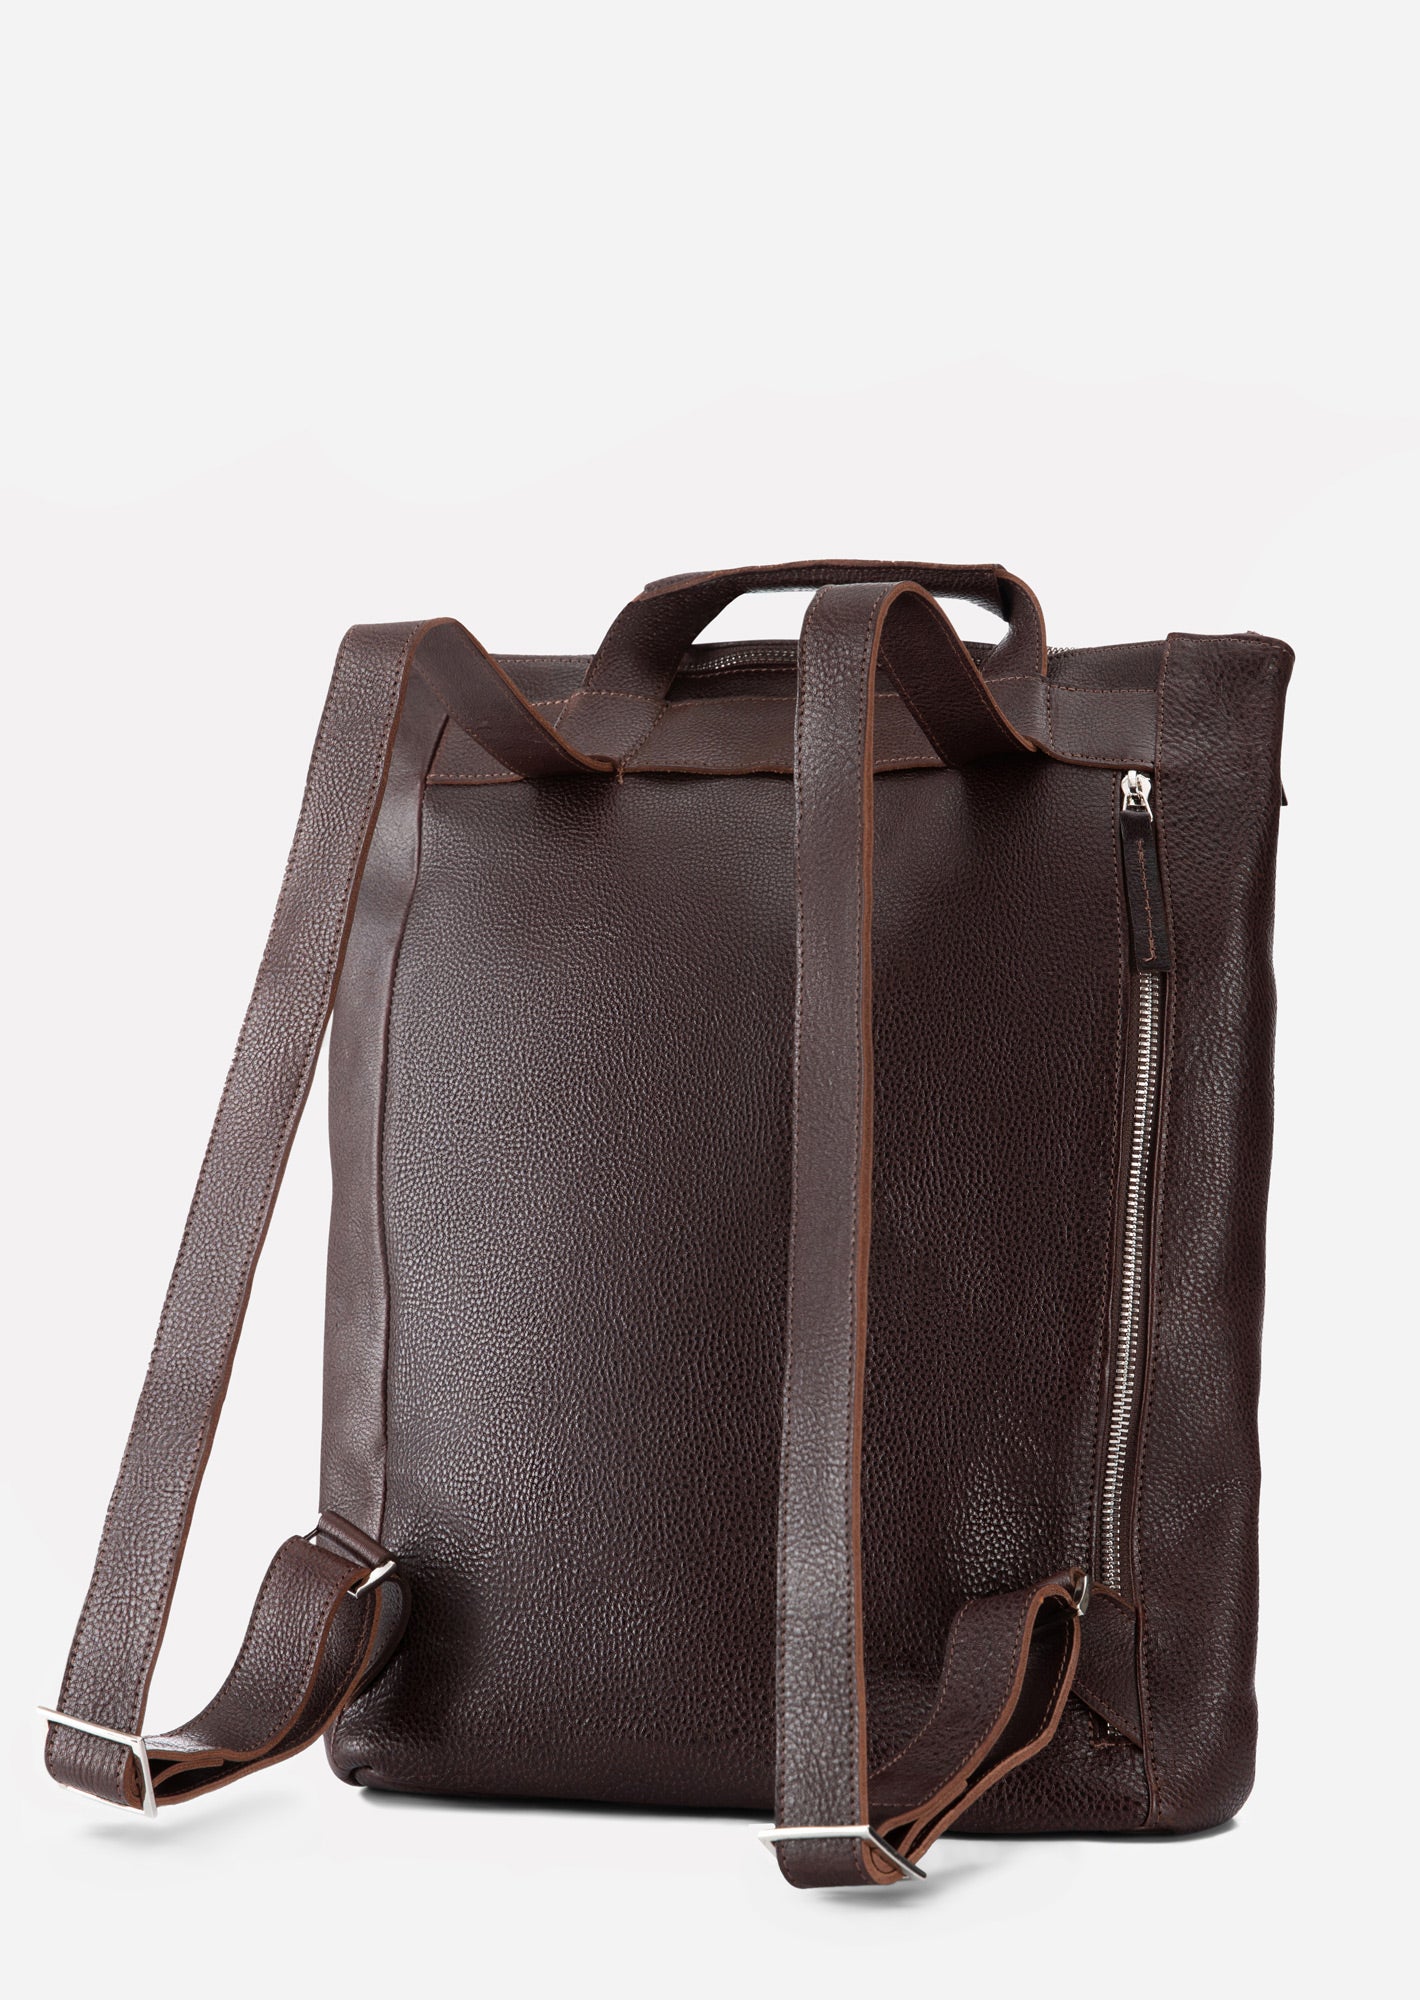 TOTE_BACKPACK_ELLIOT_BROWN_Designed_in_Berlin_Made_to_last_Handmade_in_Poland.